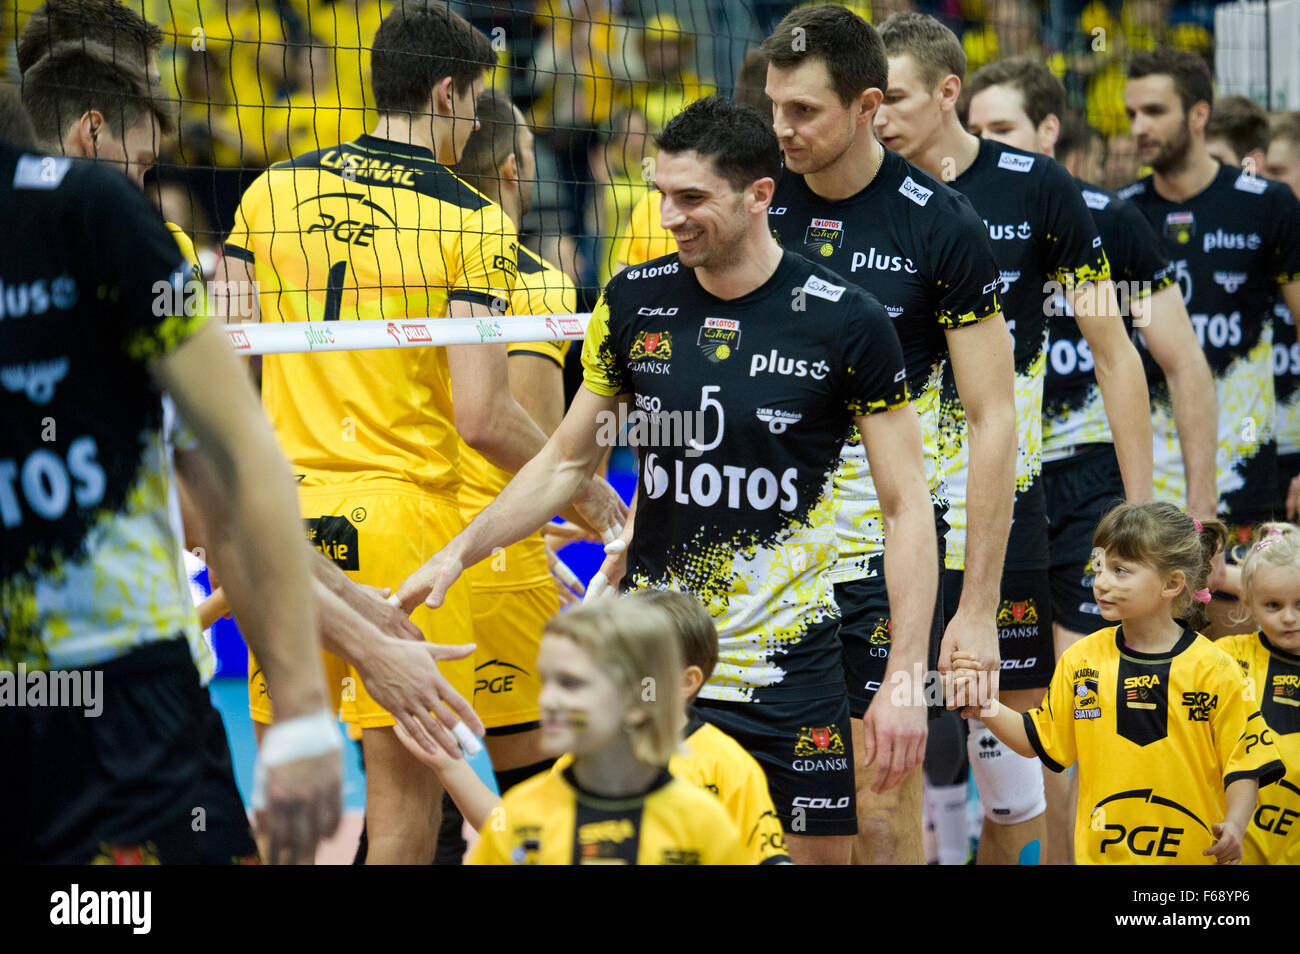 Belchatow, Poland. 14th November 2015. Team Lotos Trefl Gdansk pictured during a game against PGE Skra Belchatow in the Plus Liga Polish Professional Volleyball League. Team PGE Skra went on to win 3-0. Credit:  Marcin Rozpedowski/Alamy Live News Stock Photo